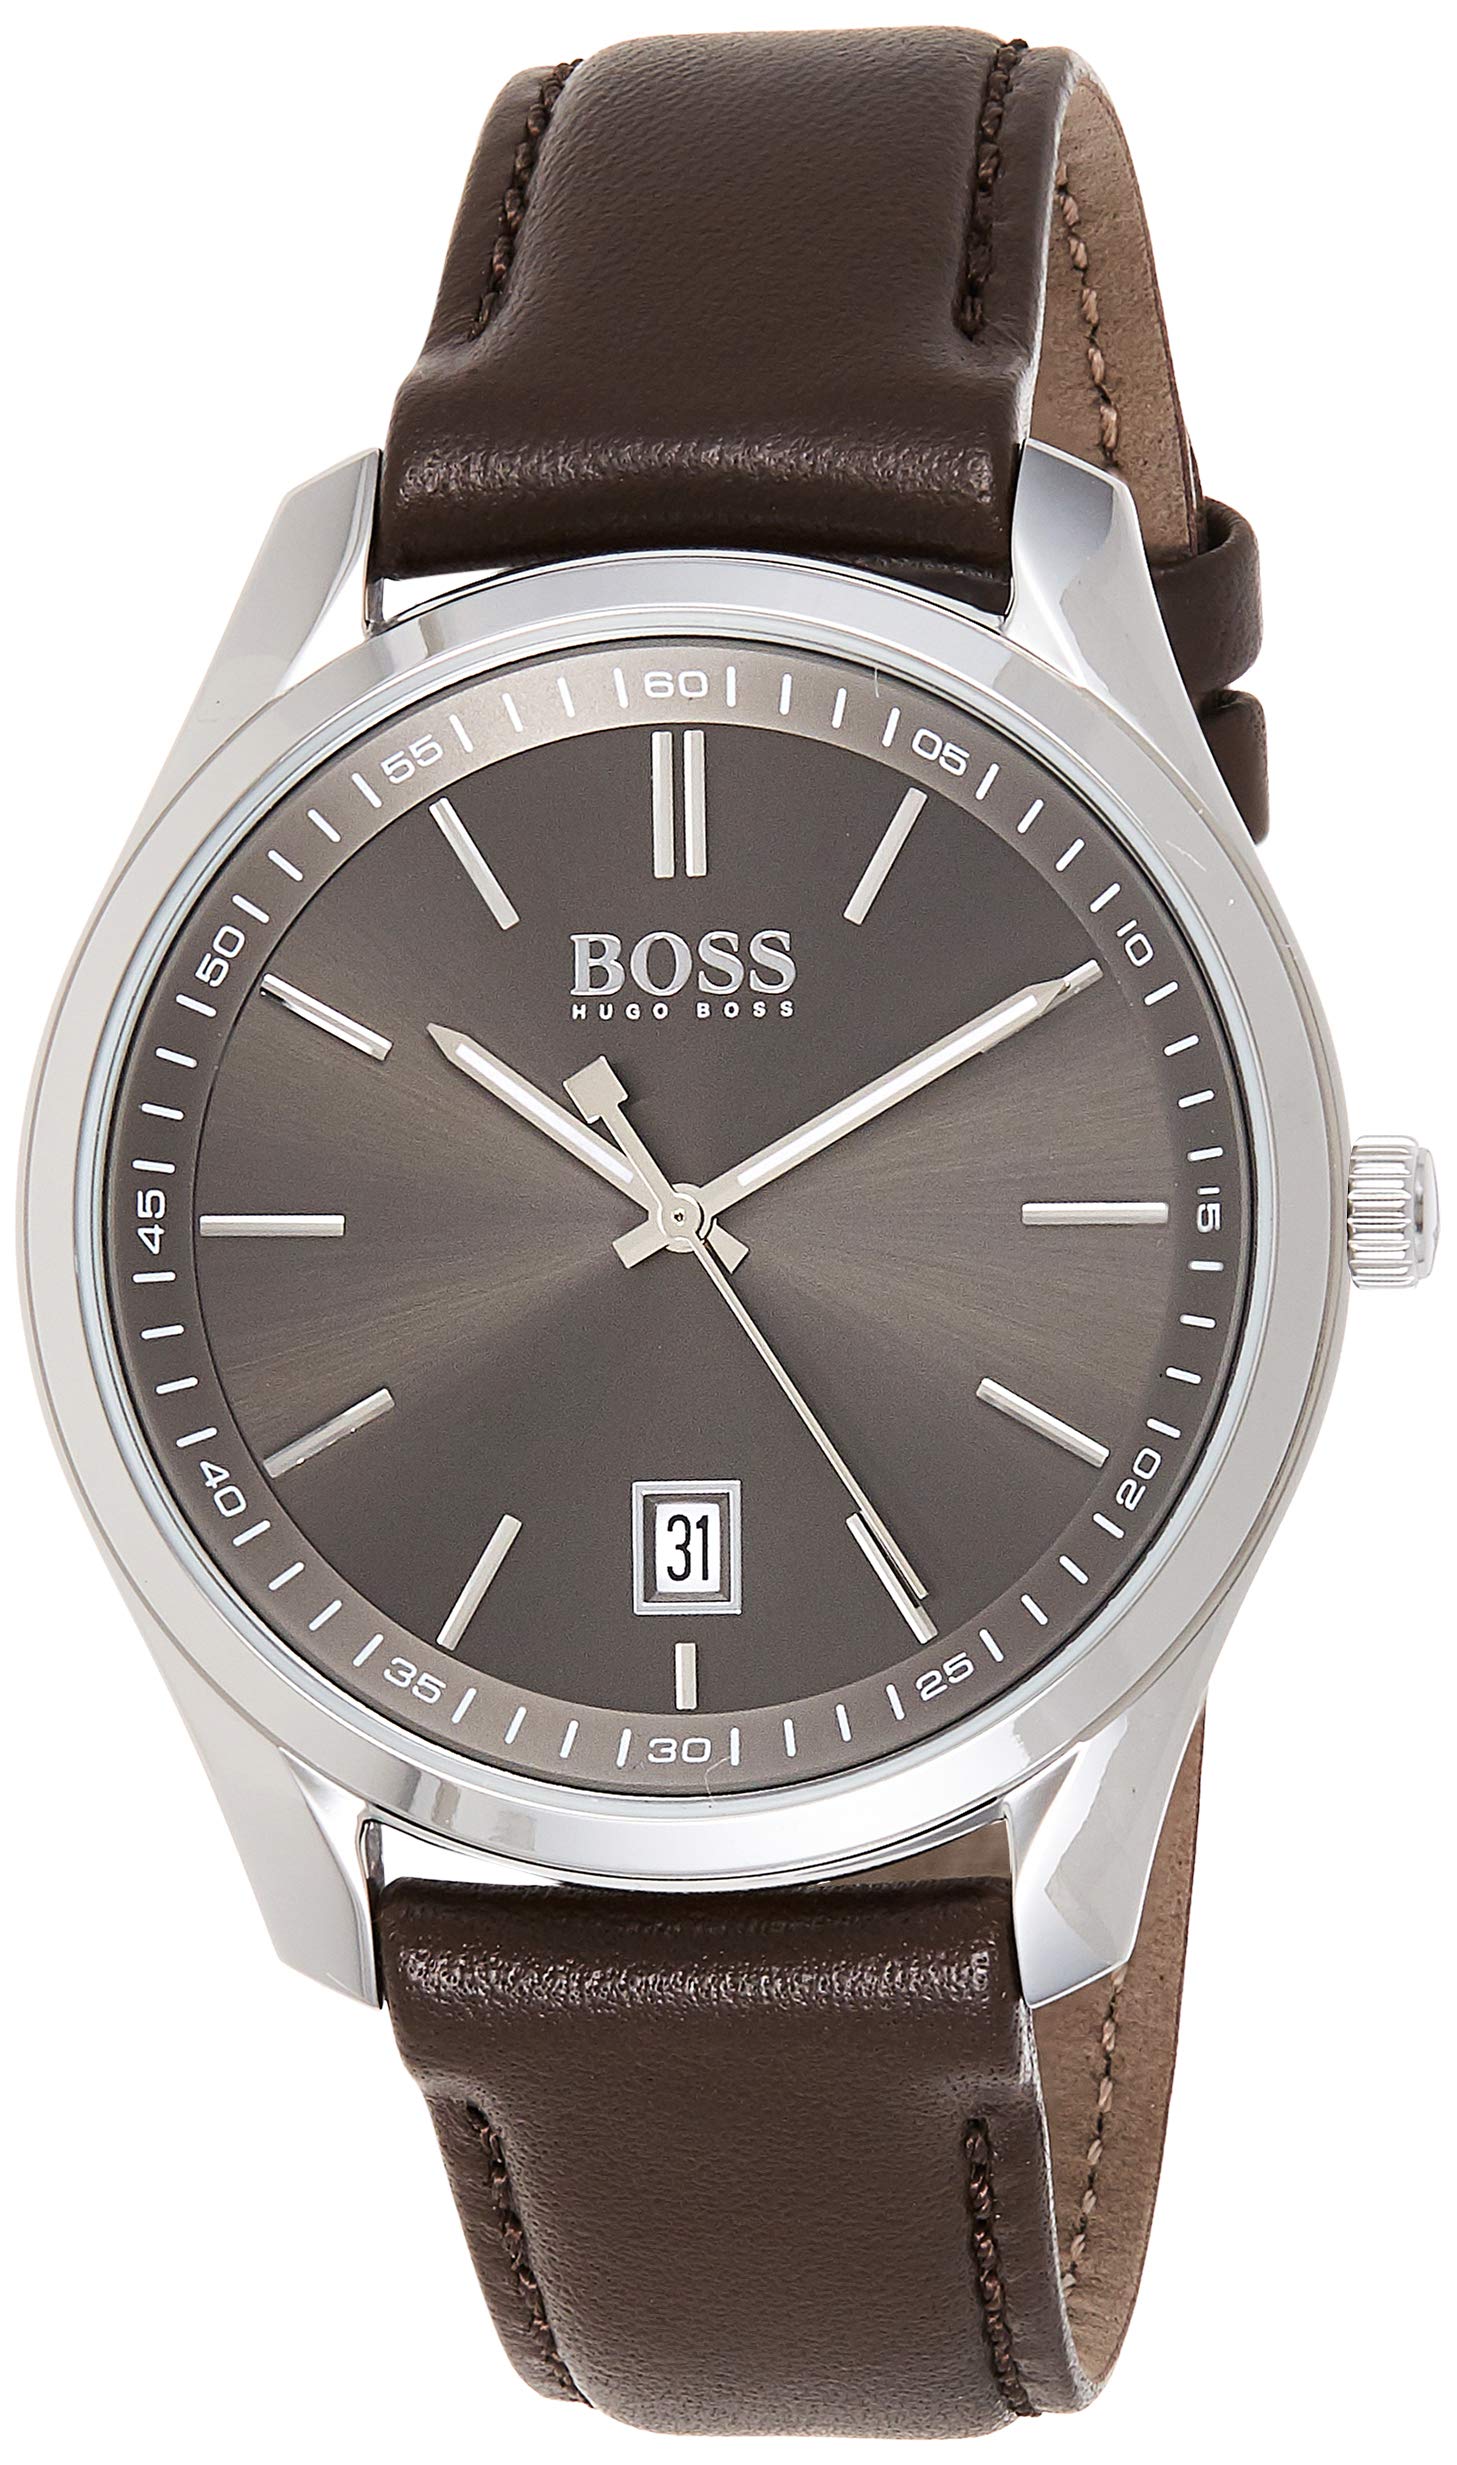 BOSS Men's Analogue Quartz Watch with Leather Strap 1513726